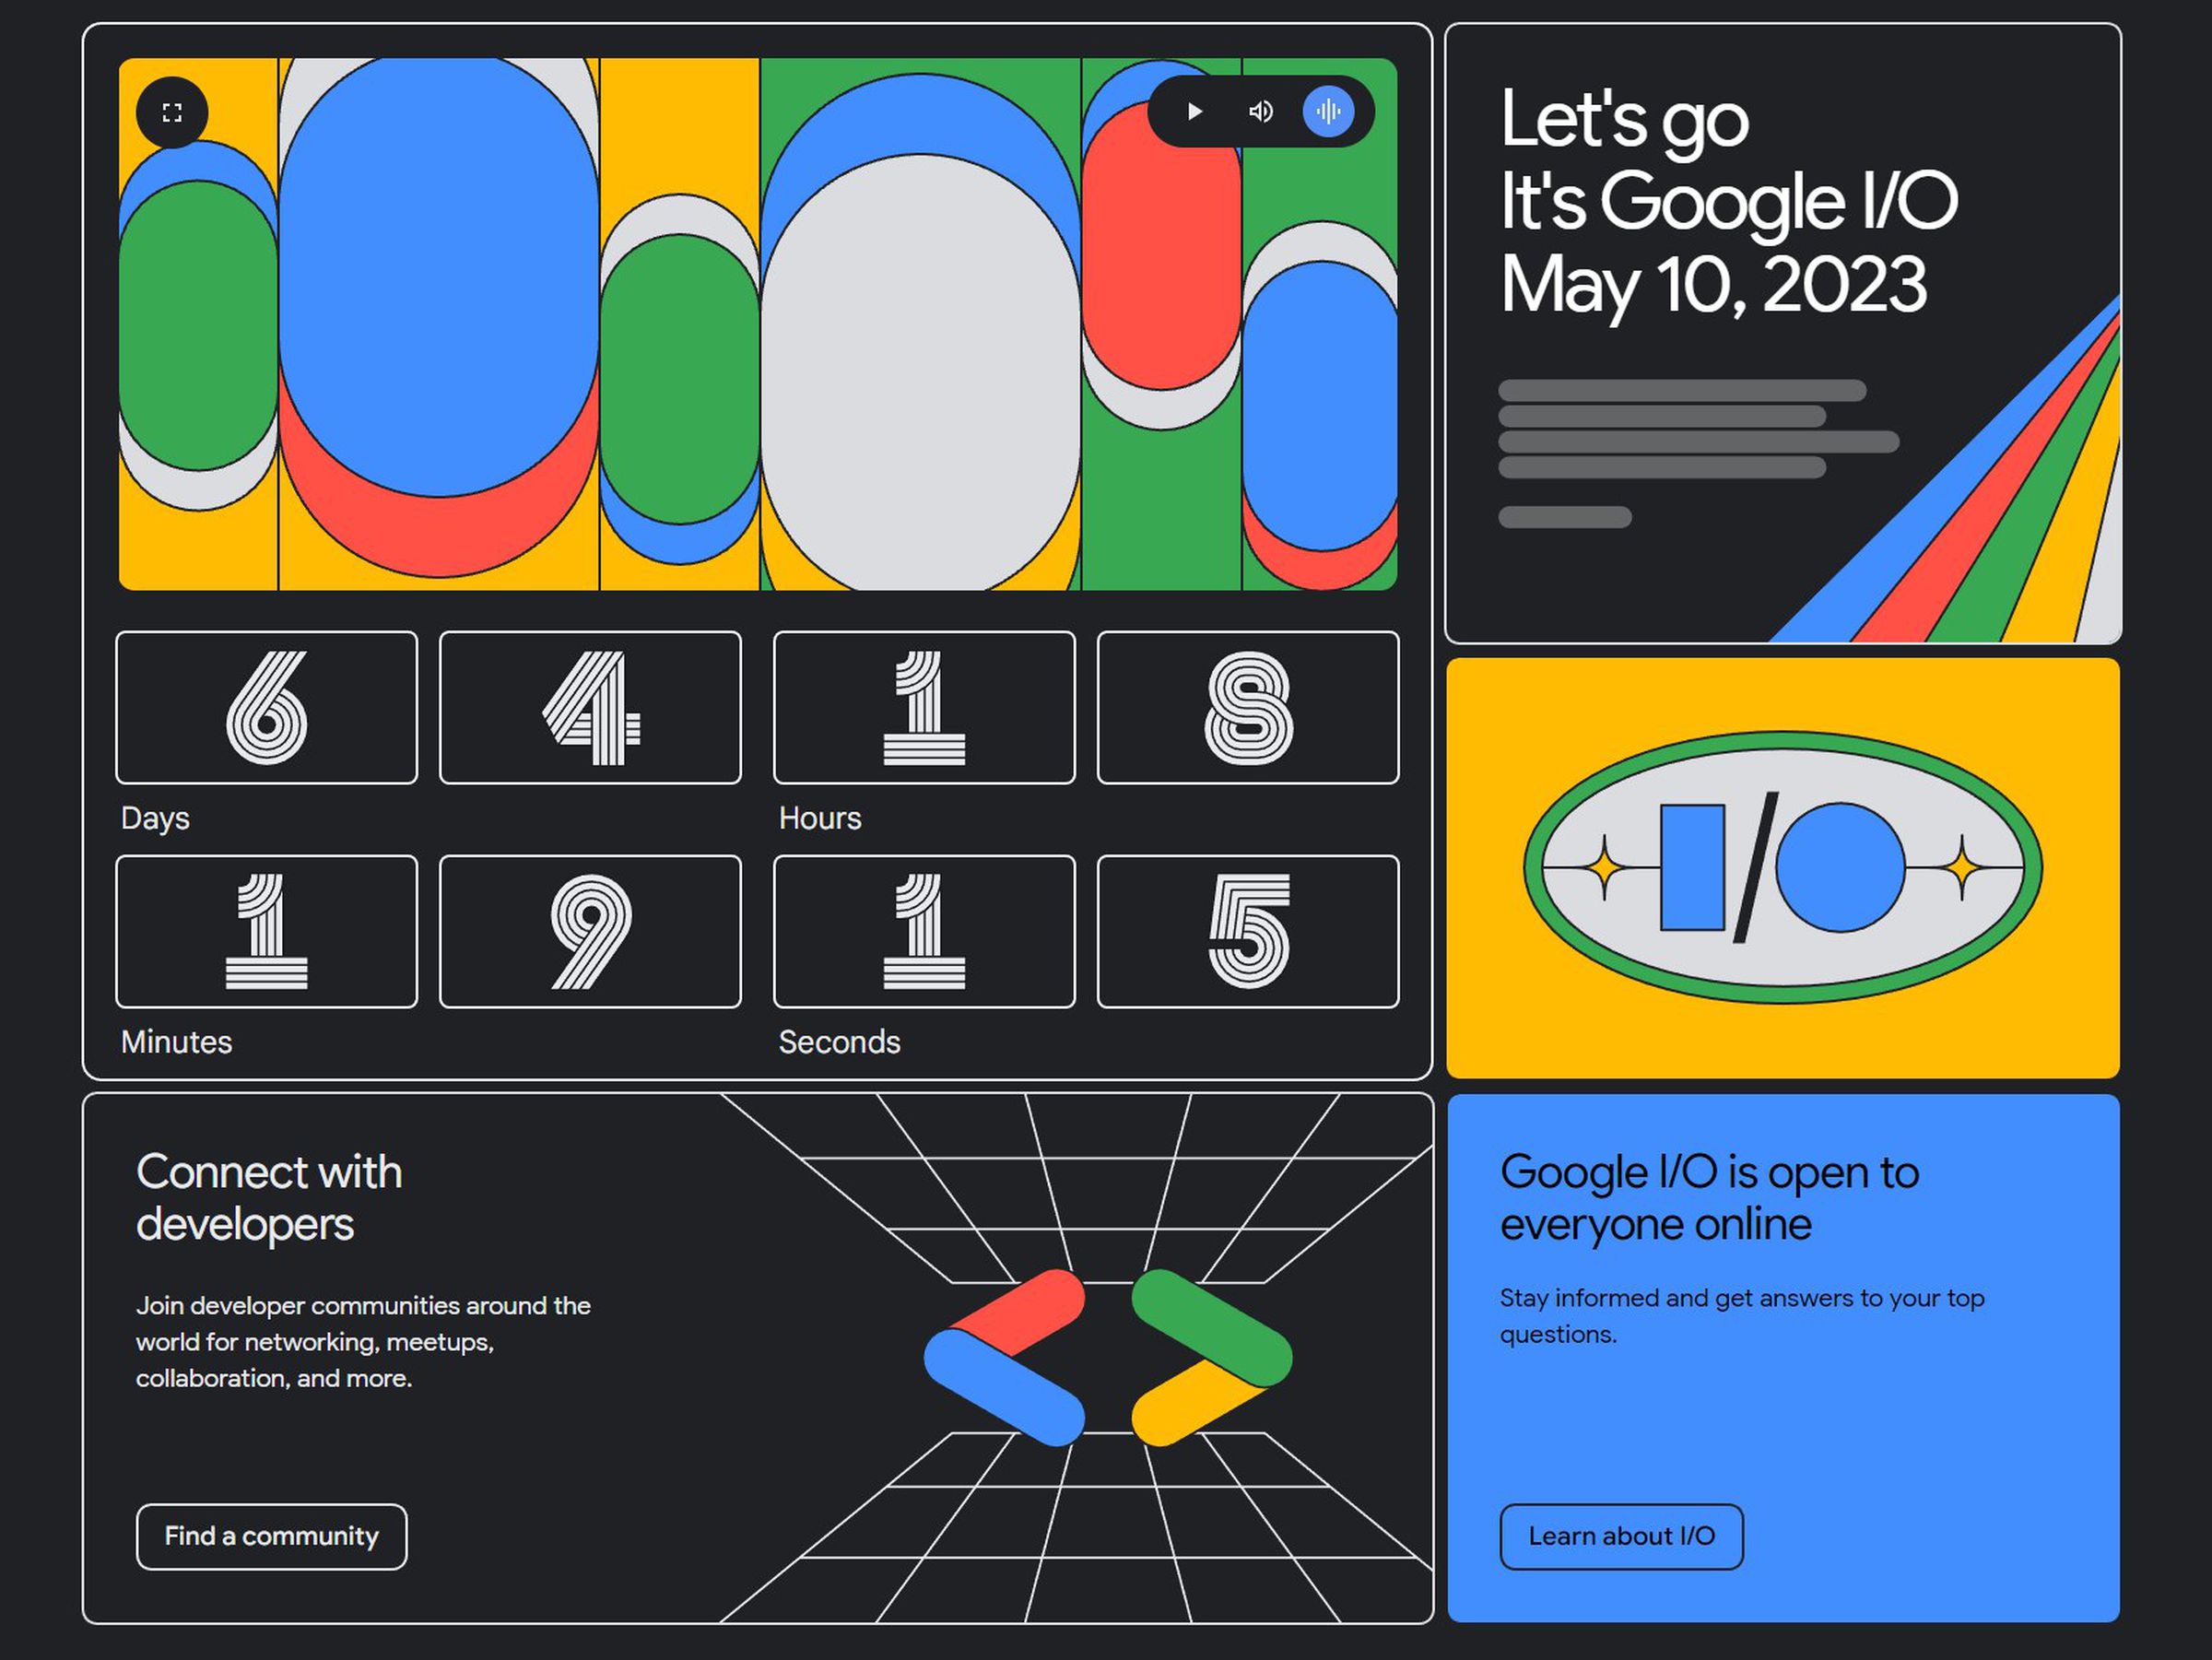 The Google I/O event website shows a countdown timer and other information, arranged in tiles and with spaces for notifications that are similar to the screen of a mobile device like a tablet or foldable smartpohone.